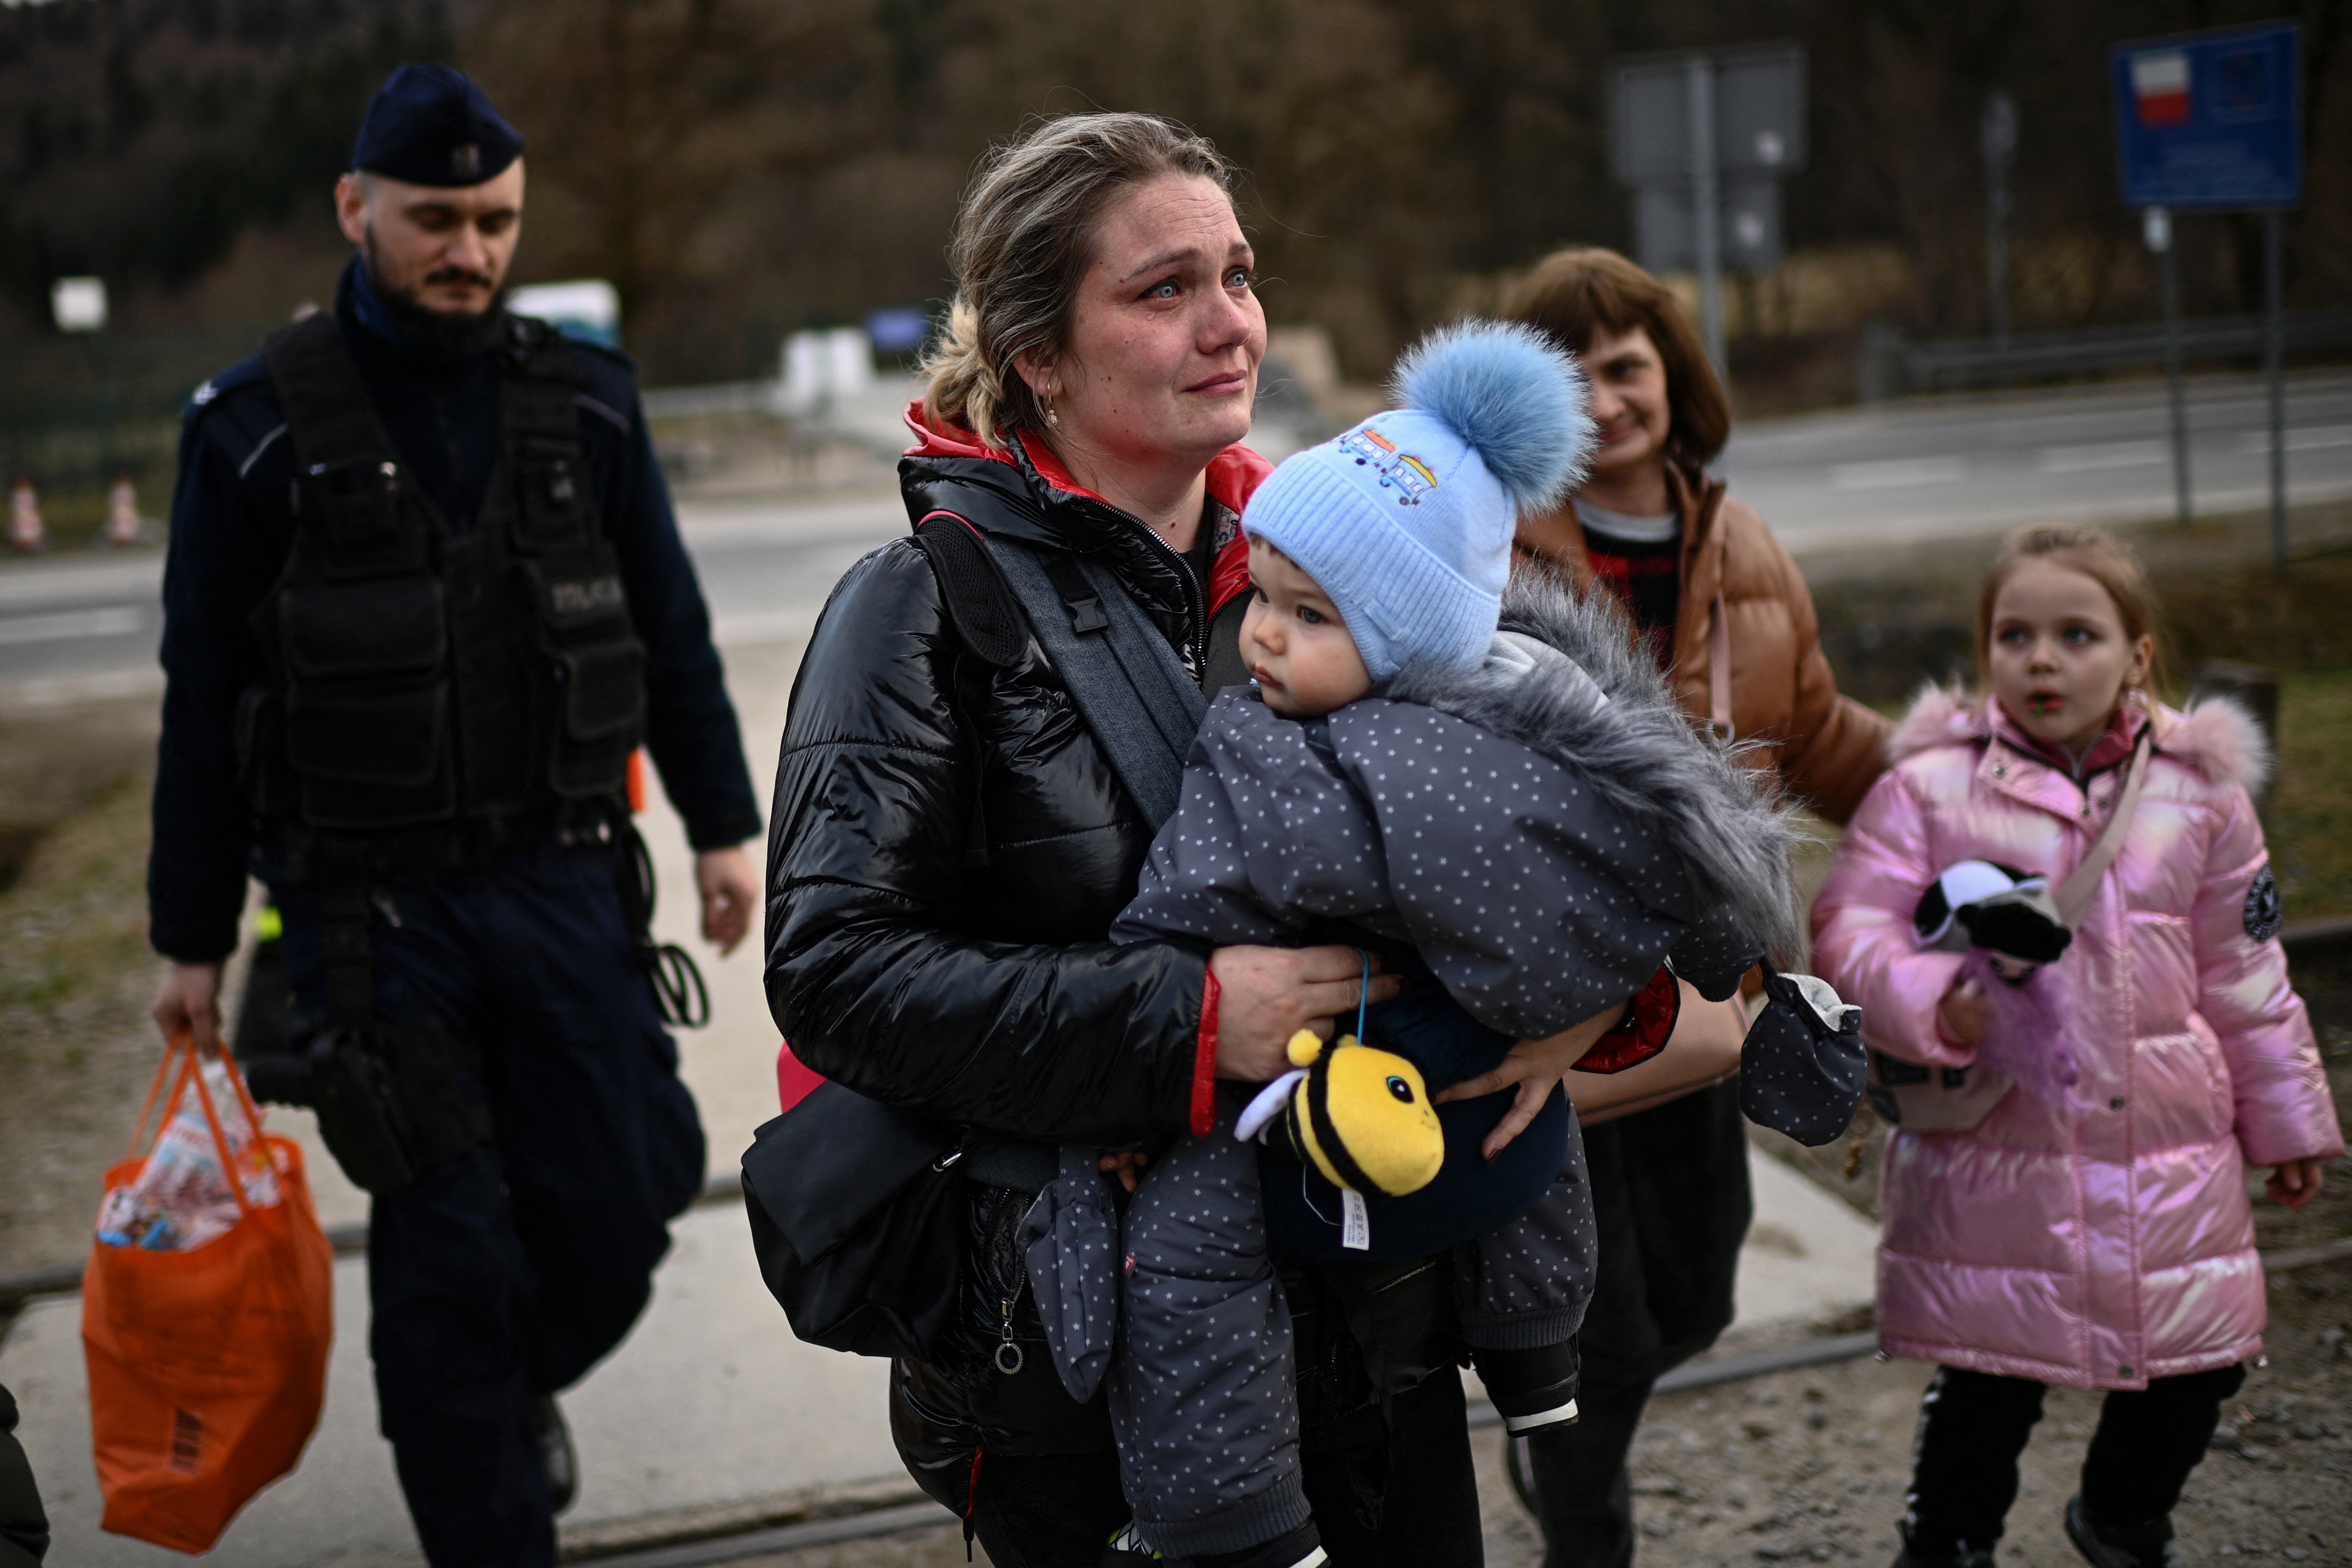 A Polish border policeman (L) carries the luggage of a Ukrainian refugee as she holds her baby after crossing the Ukrainian-Polish border into Poland along with her children at the Kroscienko border crossing, eastern Poland on April 7, 2022. (Photo by Christophe ARCHAMBAULT / AFP)